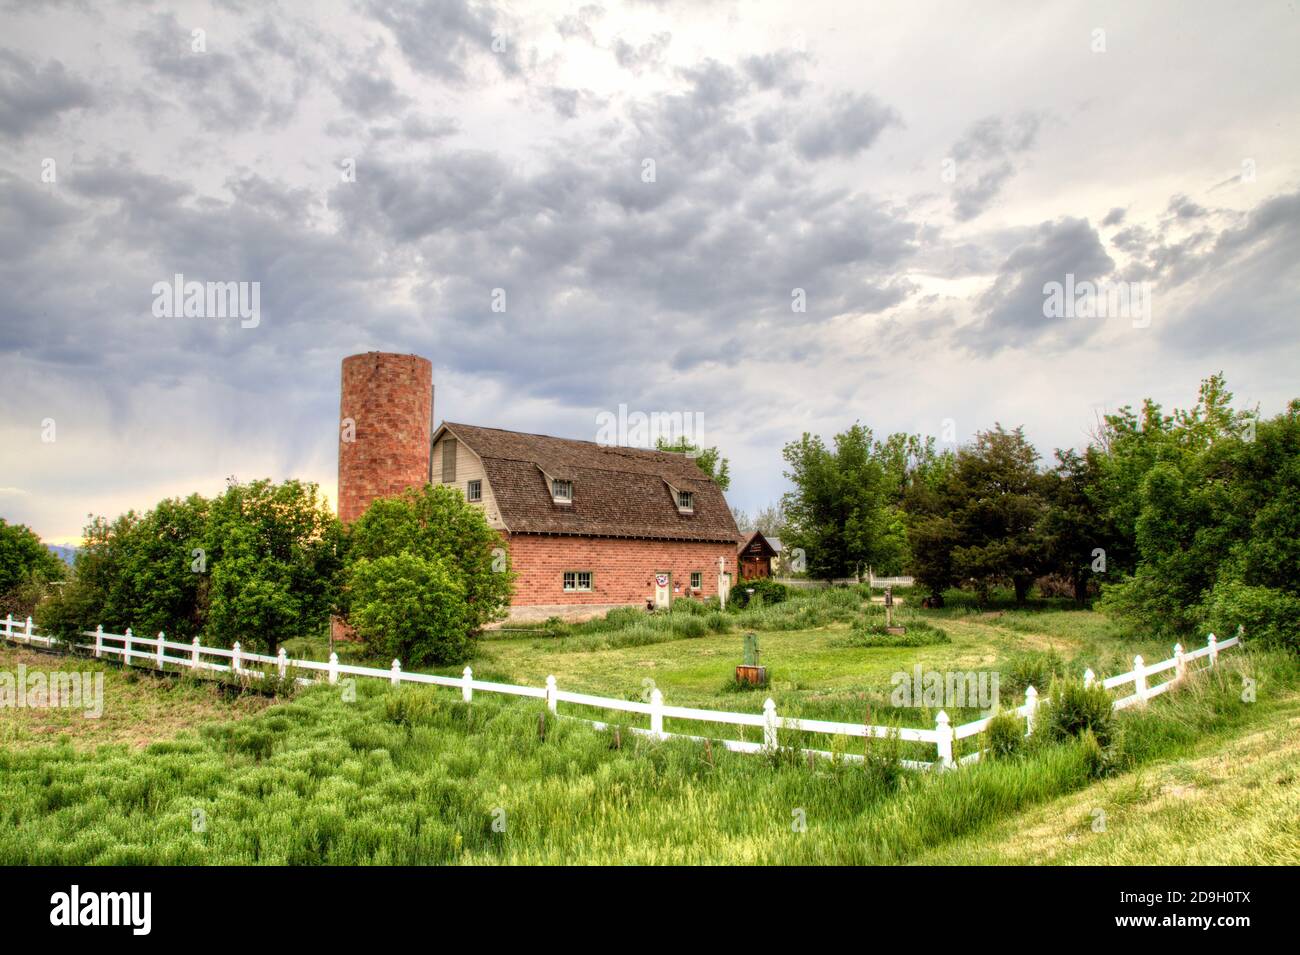 On a cloudy summer day a red brick barn and silo sit in a lush meadow surrounded by a white rail fence. Stock Photo